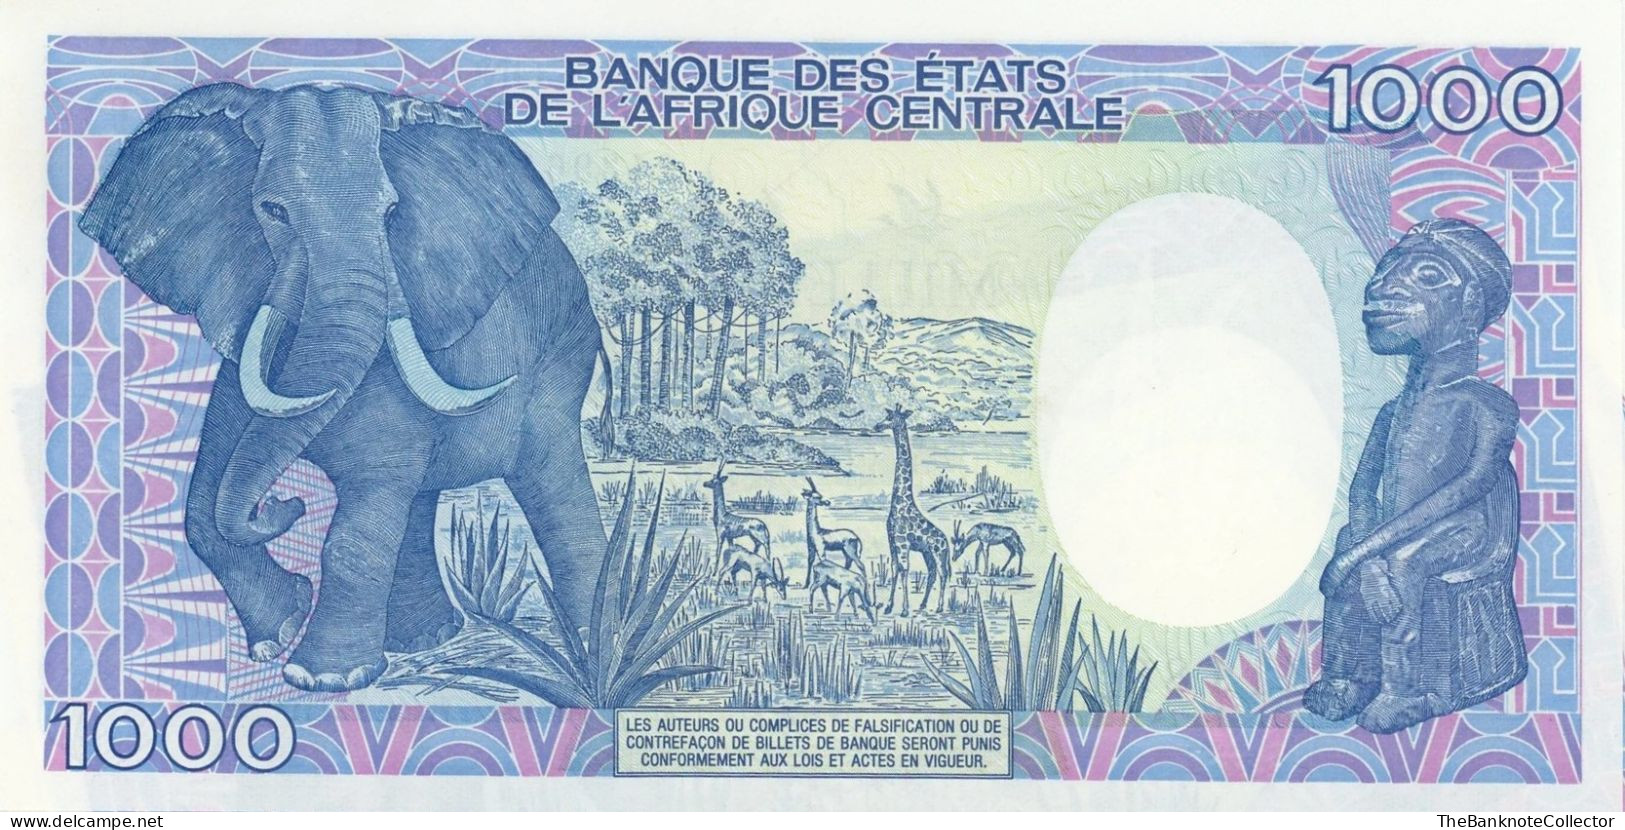 Congo 1000 Francs 1991 P-10 UNC - Central African States